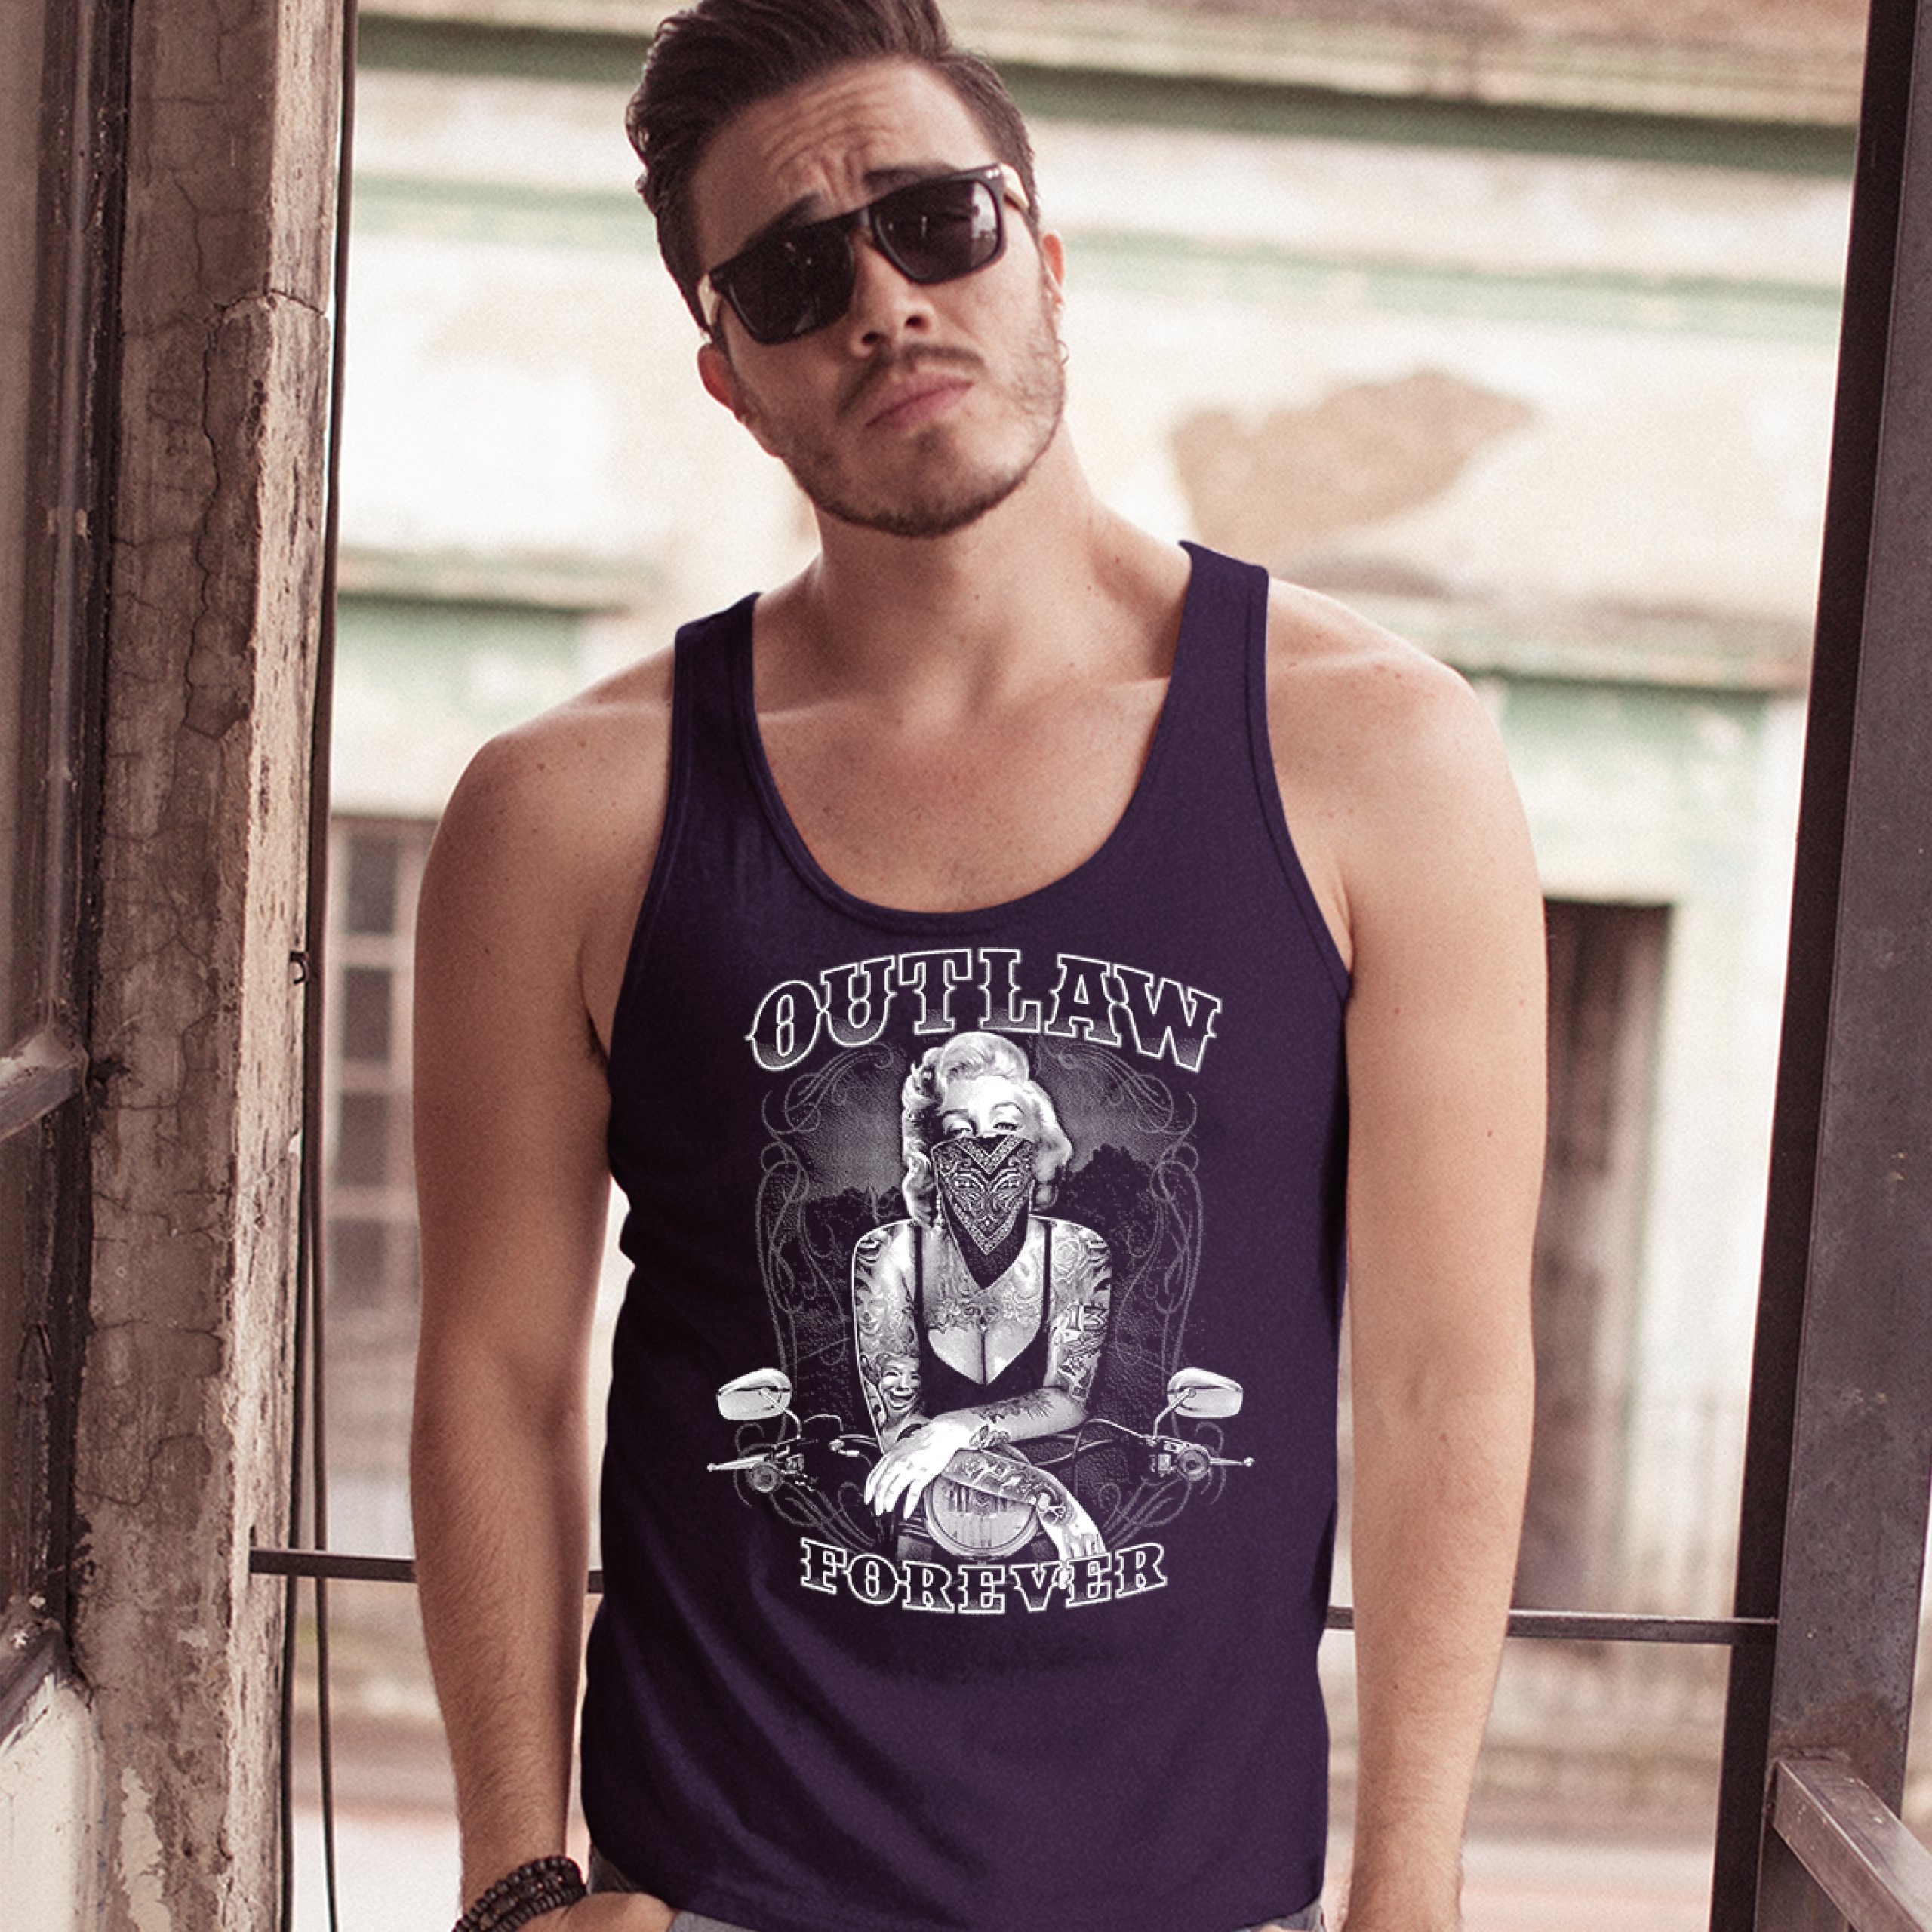 Become An Outlaw Muscle Shirt 2nd Amendment Right to Bear Arms Skull Sleeveless